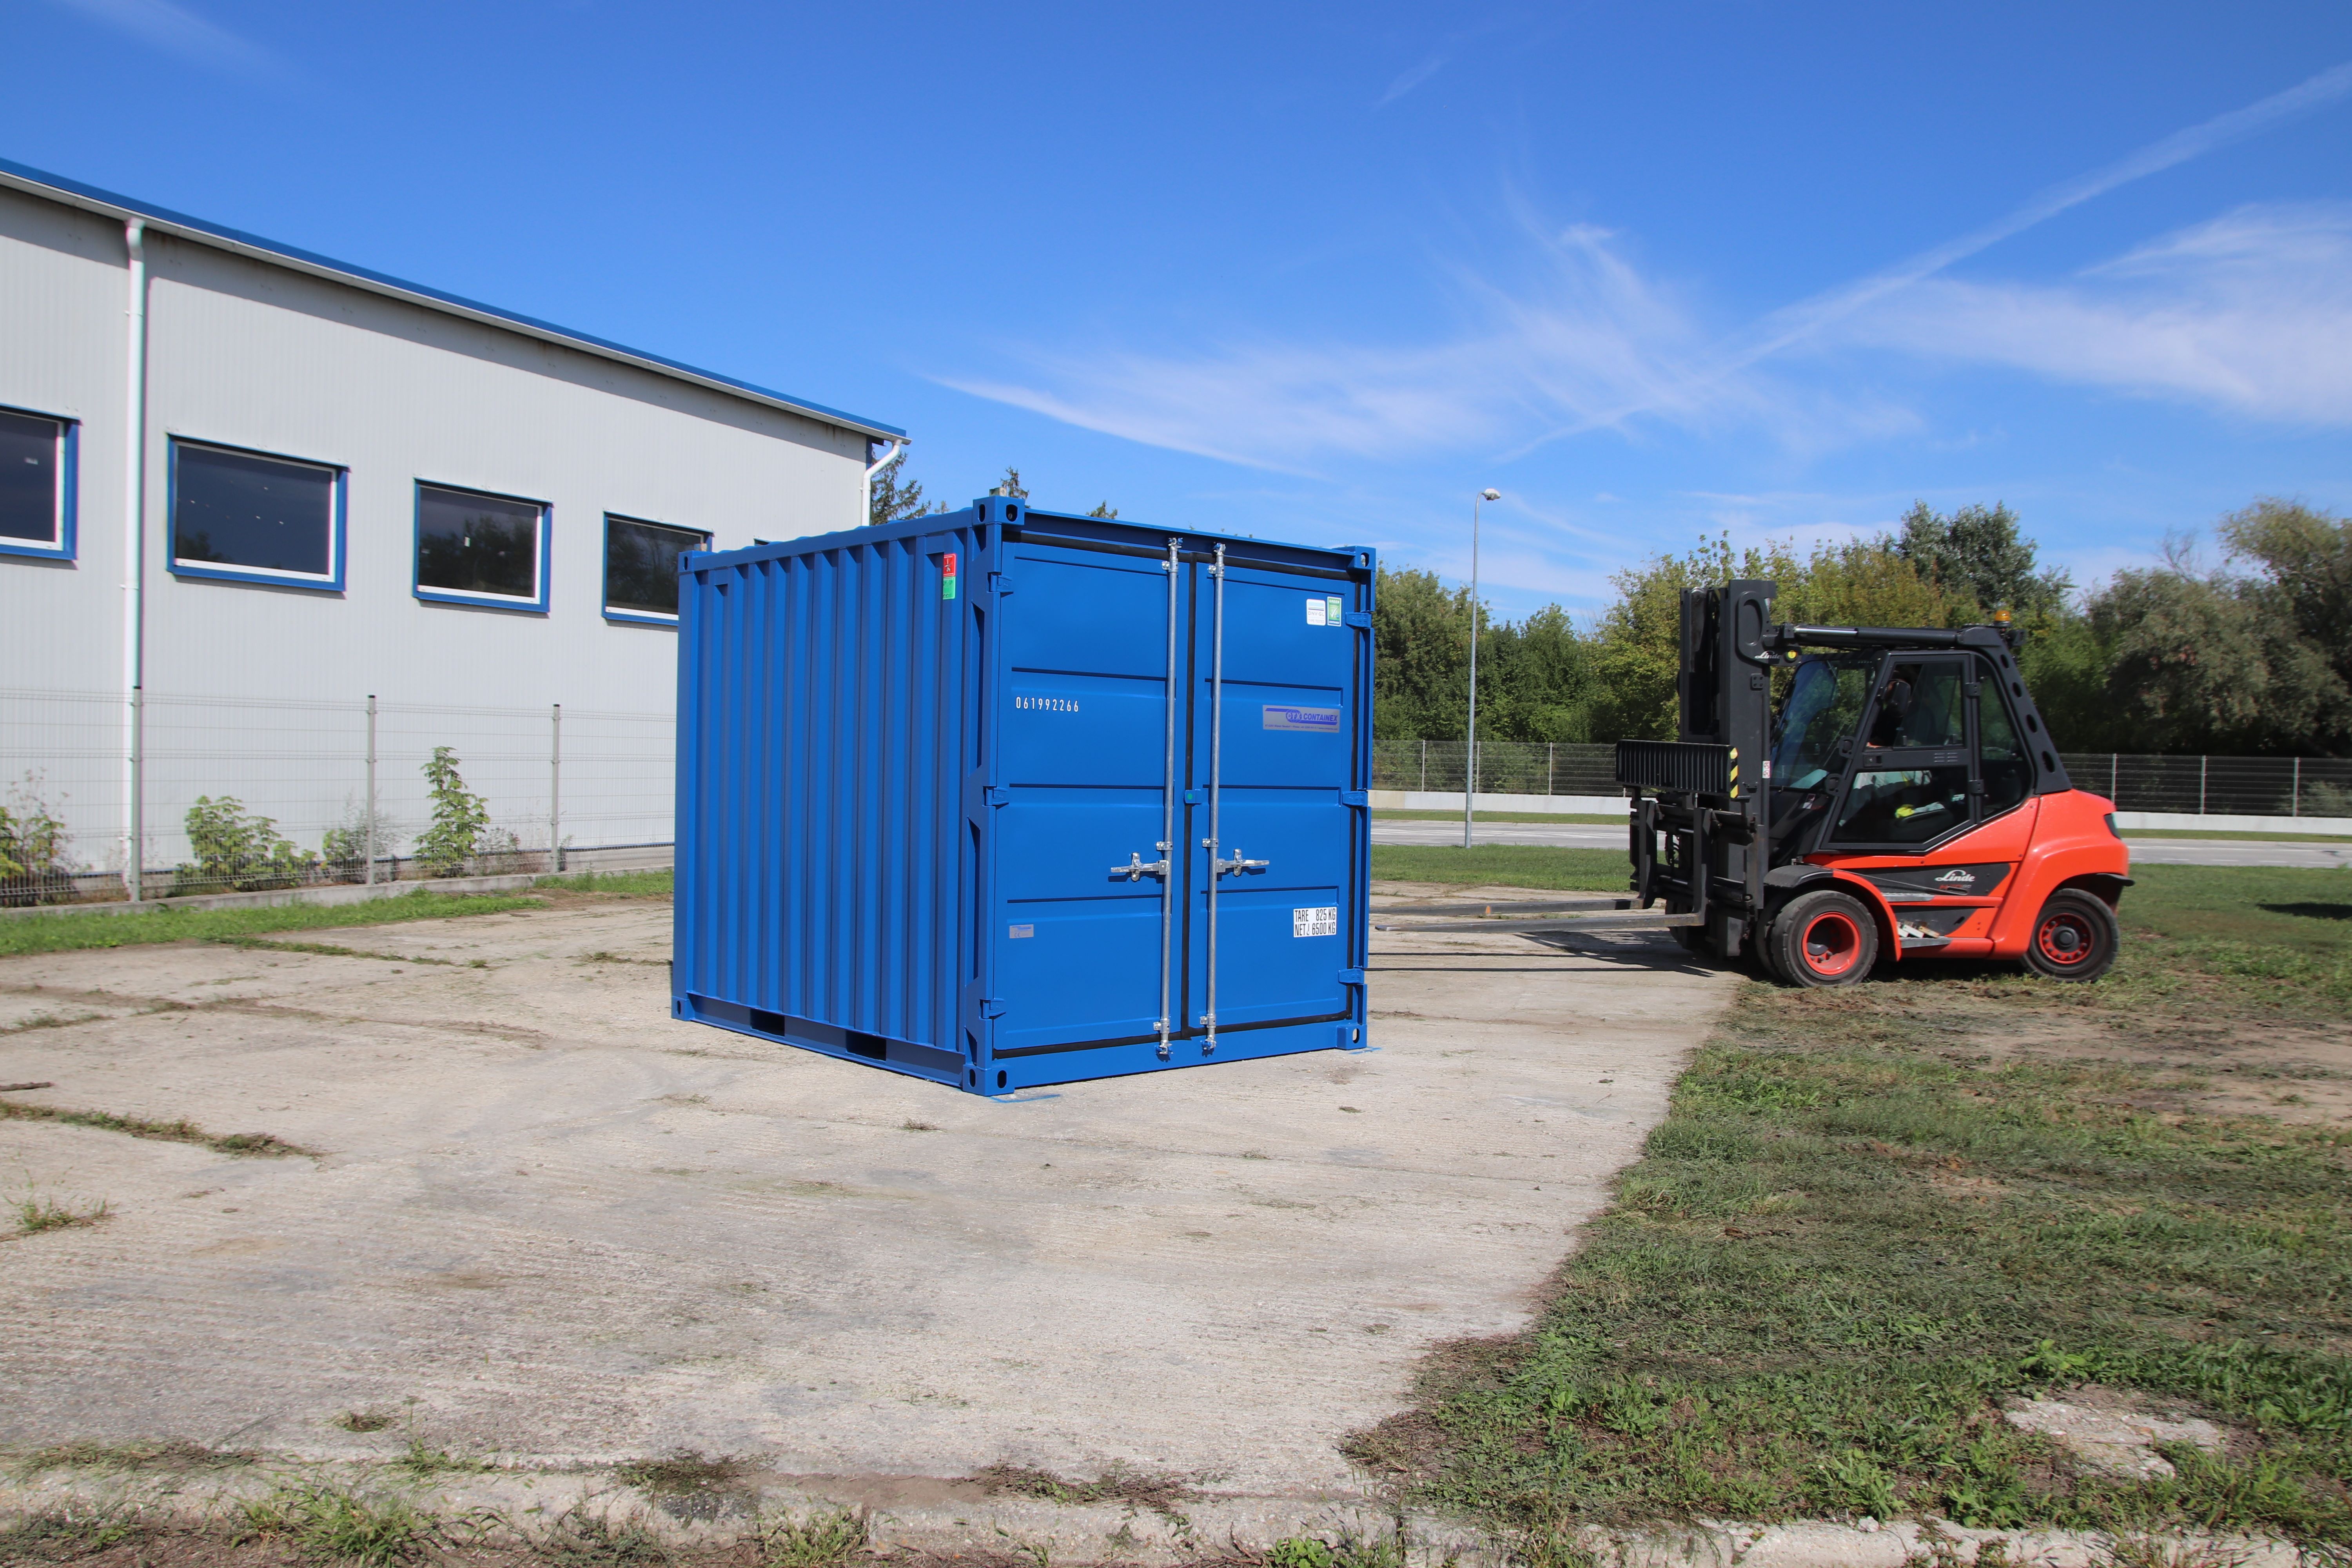 10 Fuß Lagercontainer